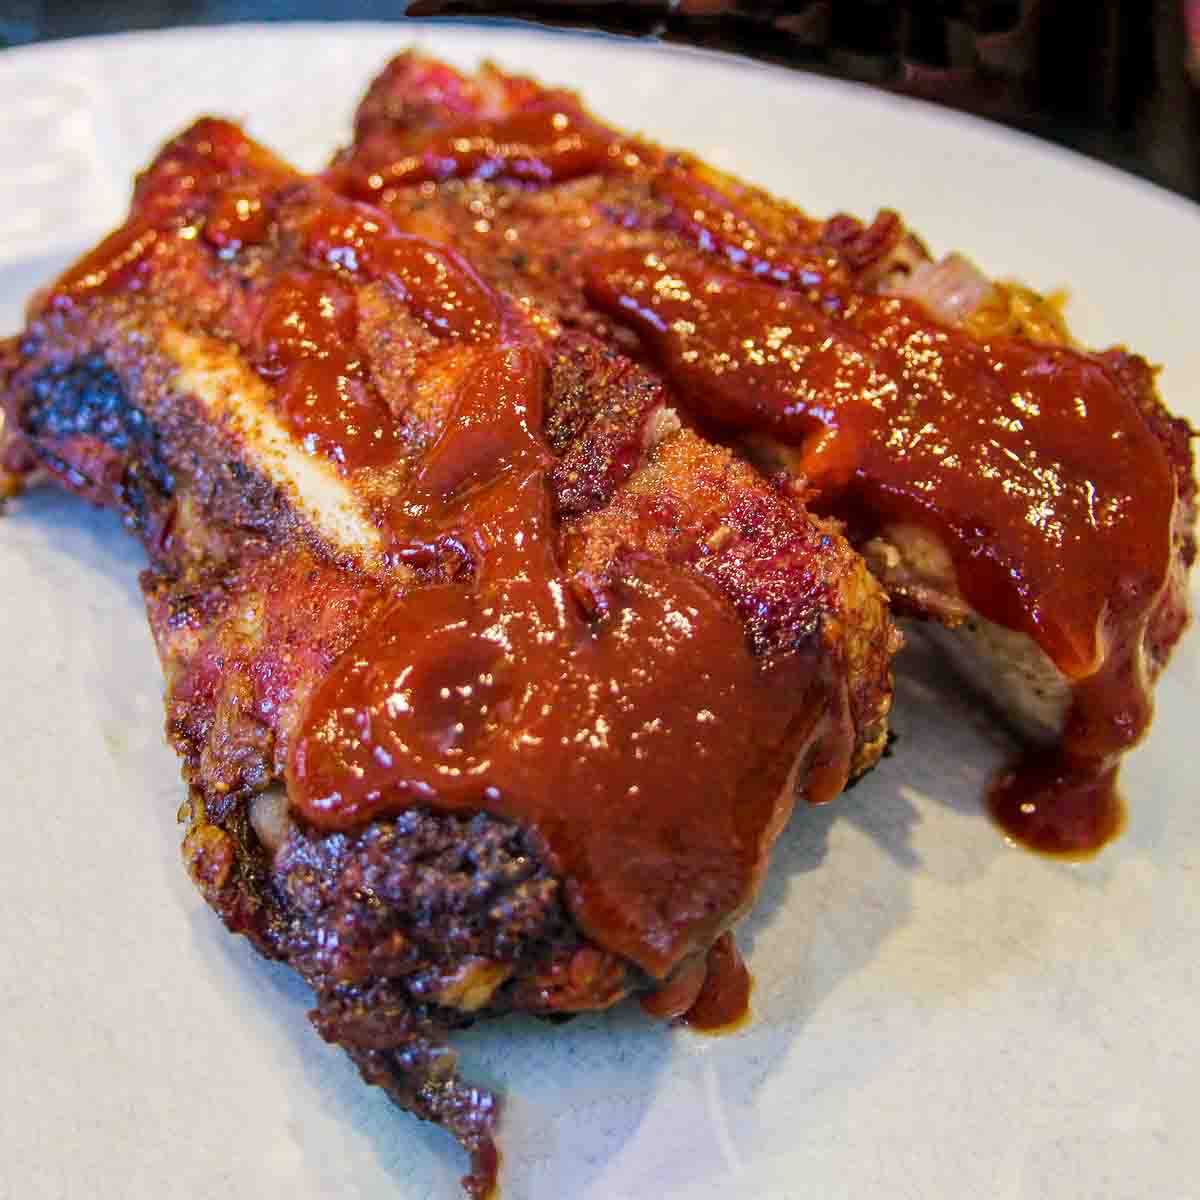 Ribs with sauce on white plate.